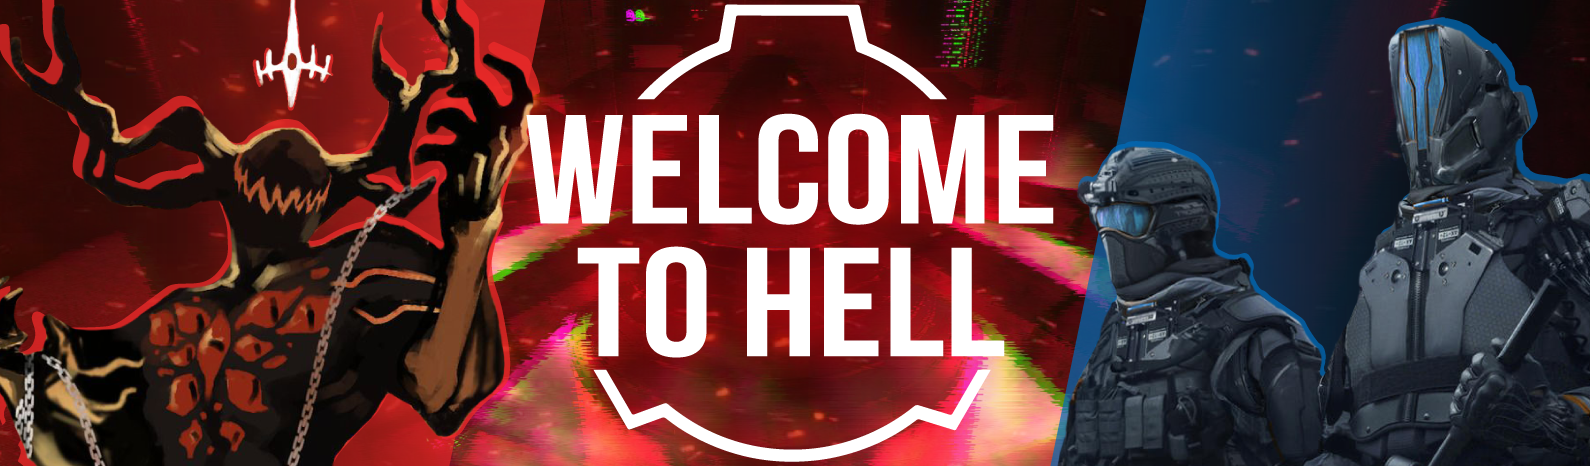 welcome_to_hell_scp_banner.png